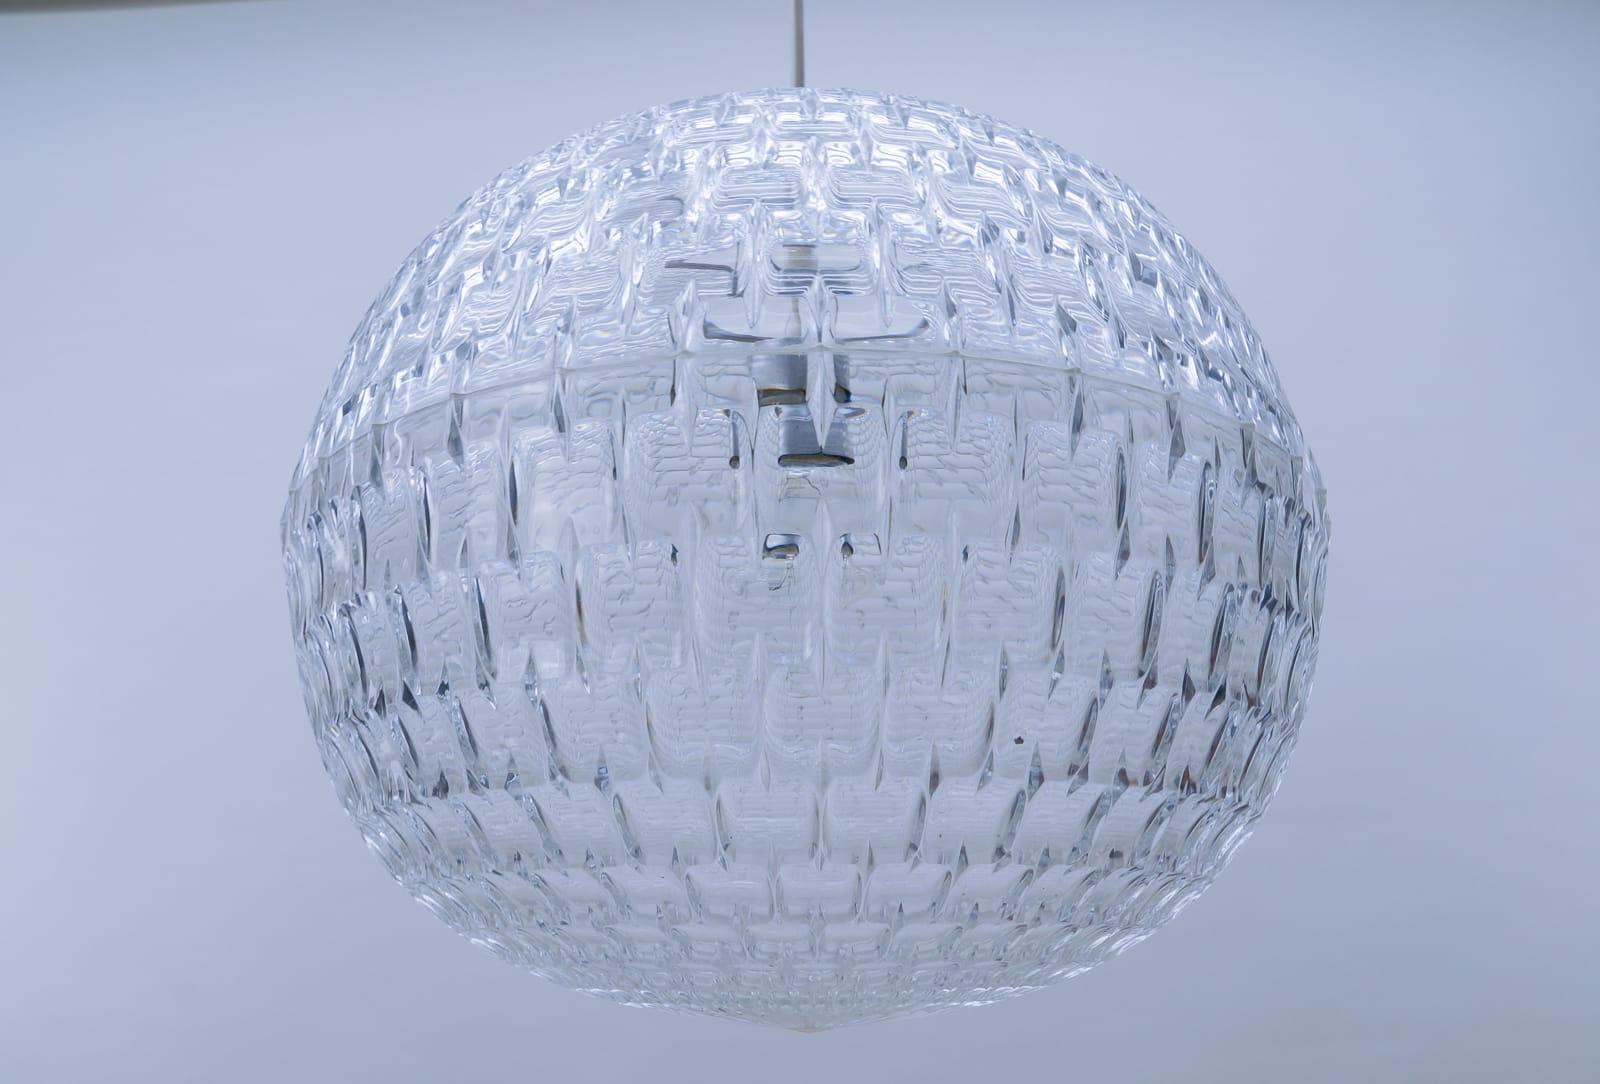 Clear Acrylic Pendant Lamp by Aloys F. Gangkofner for Erco Leuchten, 1960s For Sale 2